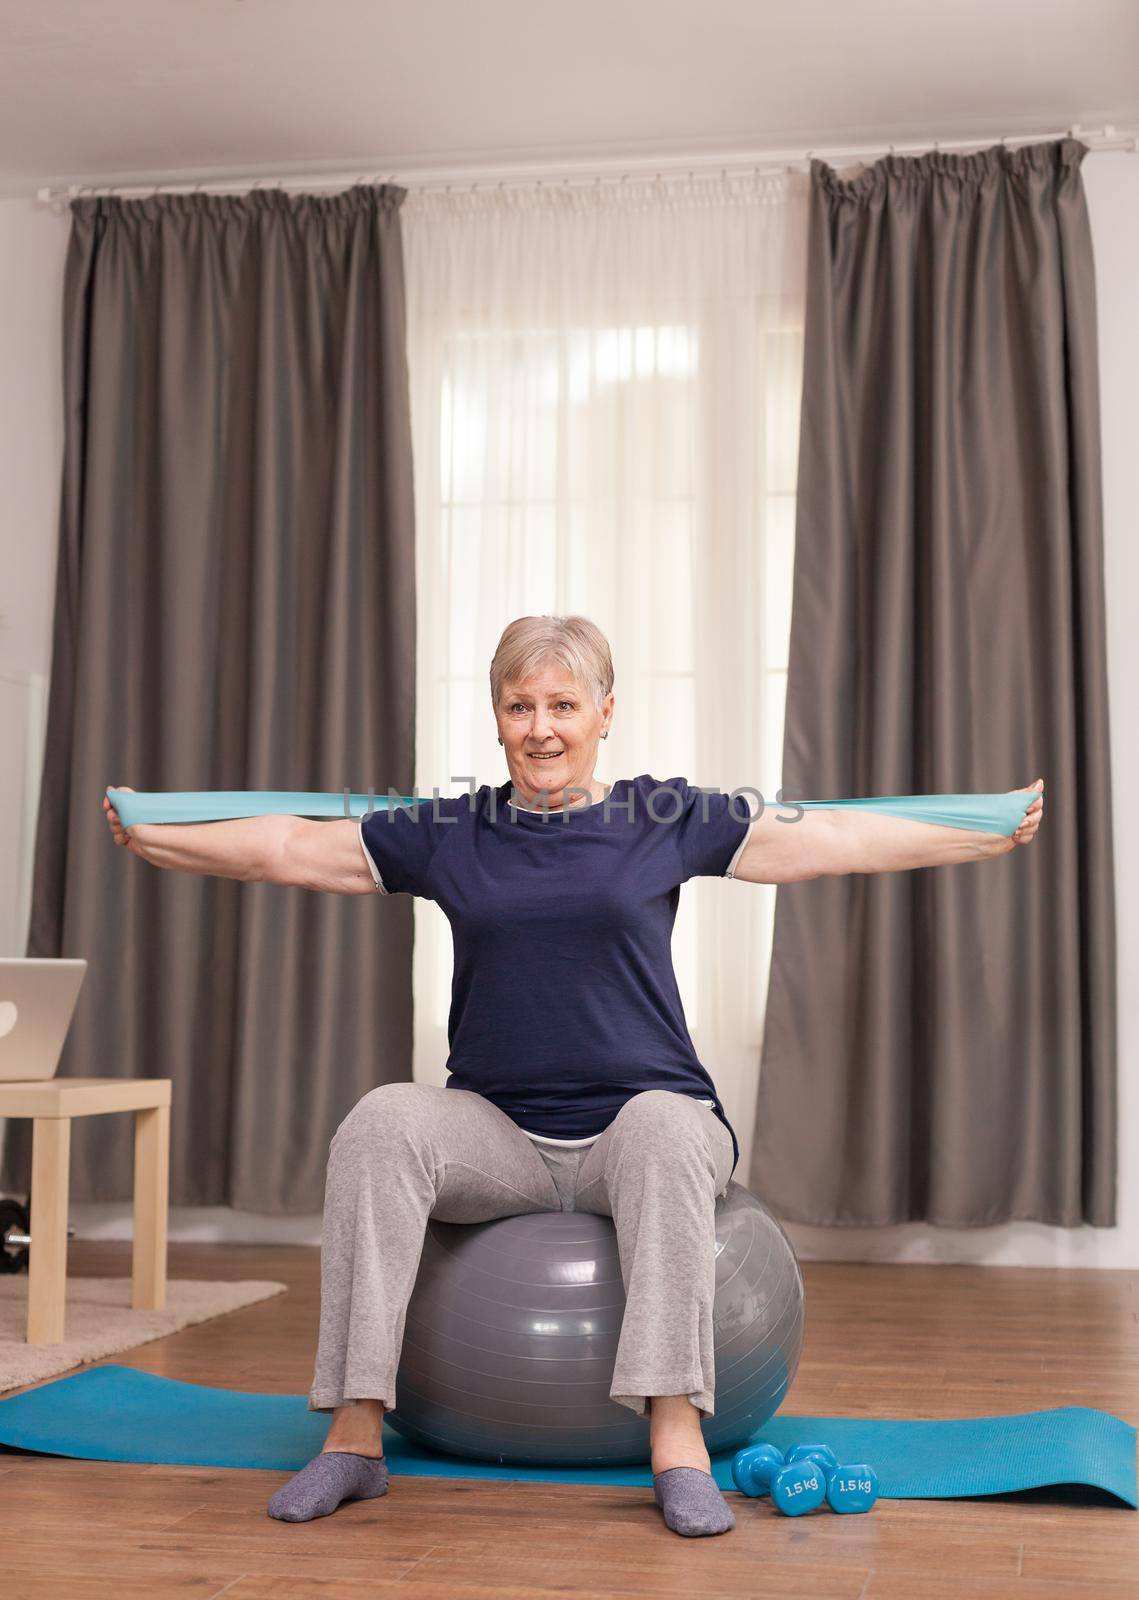 Retired woman with a healthy mind, sitting on a balance ball and training with an elastic band. Old person pensioner online internet exercise training at home sport activity with dumbbell, resistance band, swiss ball at elderly retirement age